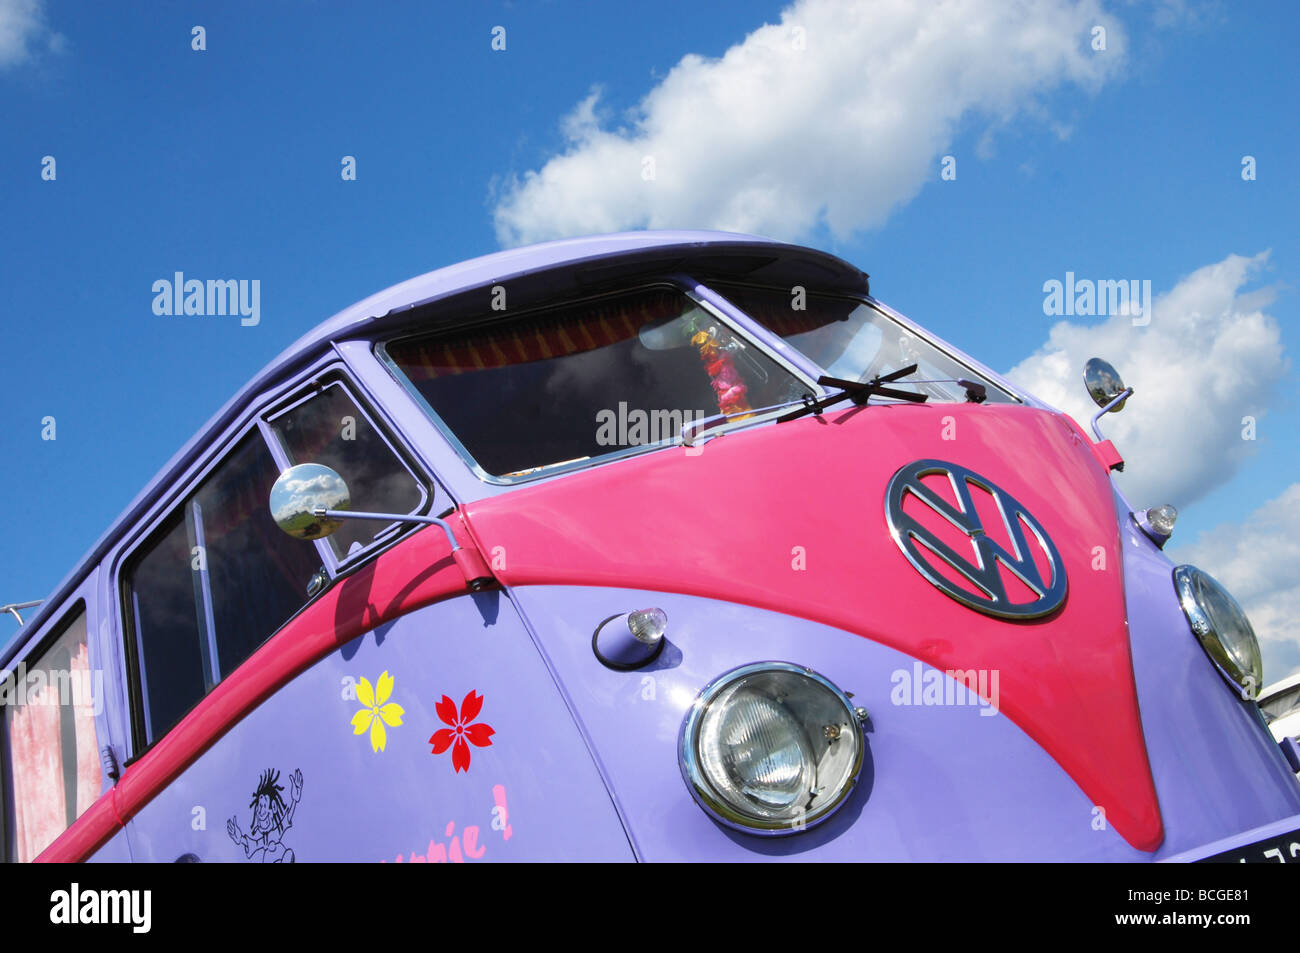 Classic VW bus against blue skies Stock Photo